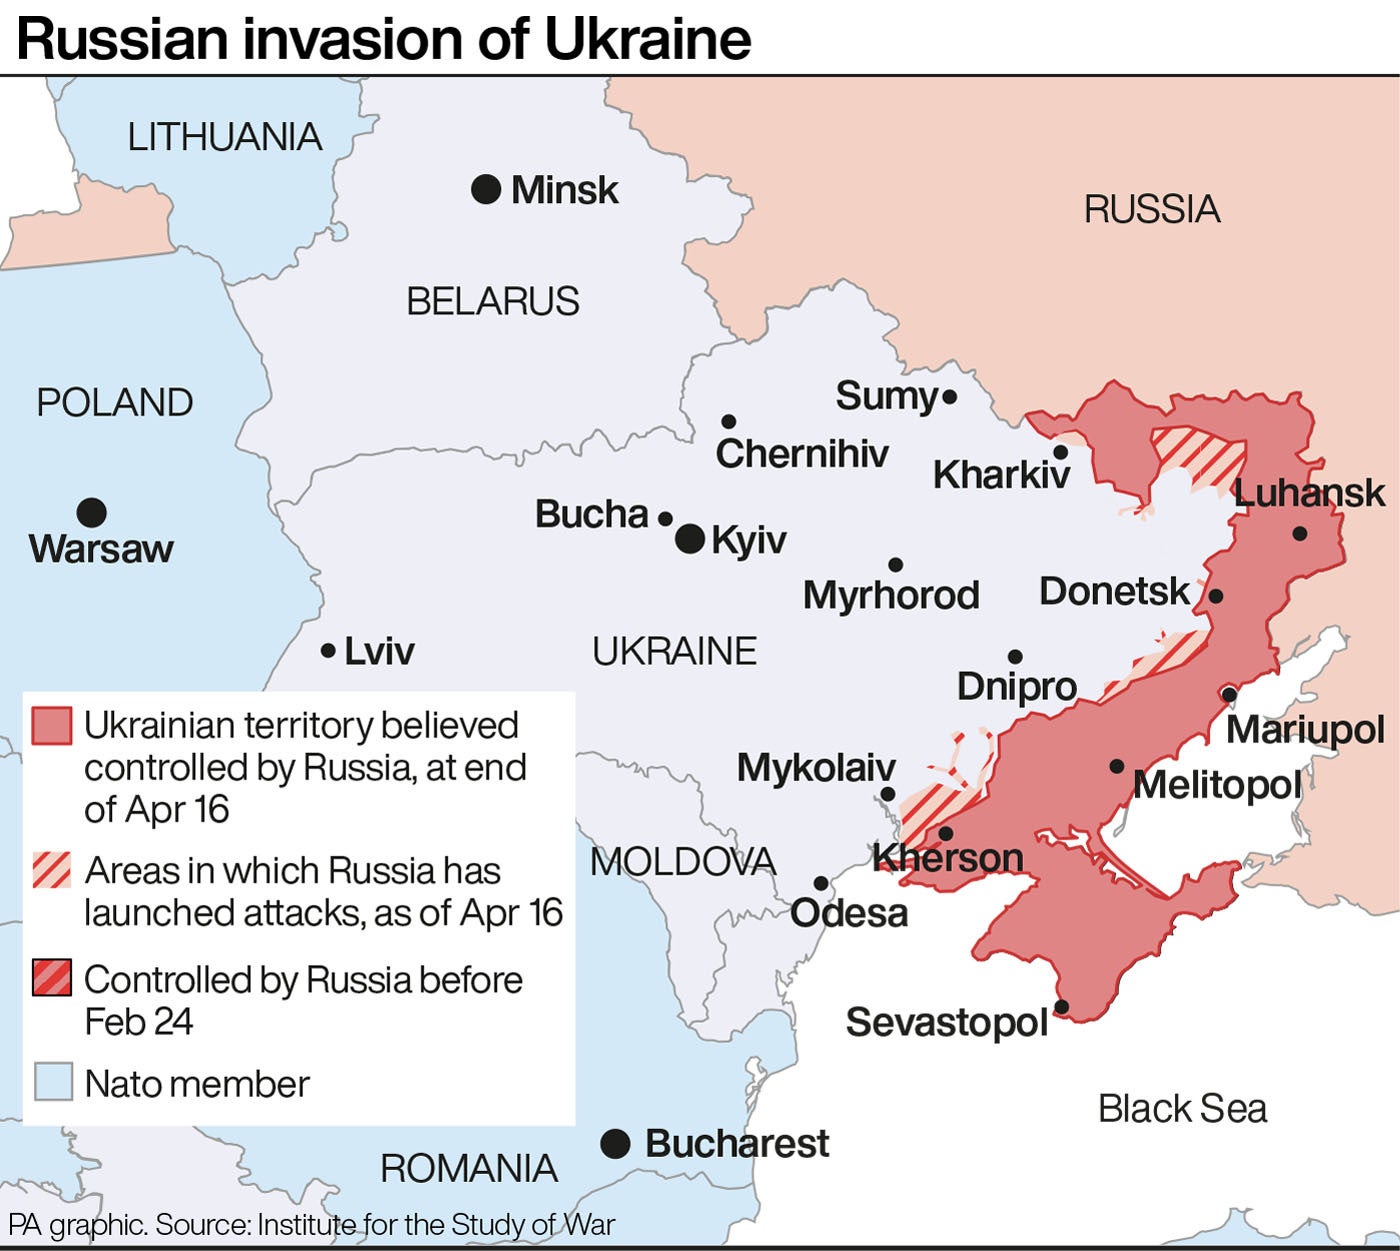 This map shows the extent of the Russian invasion of Ukraine